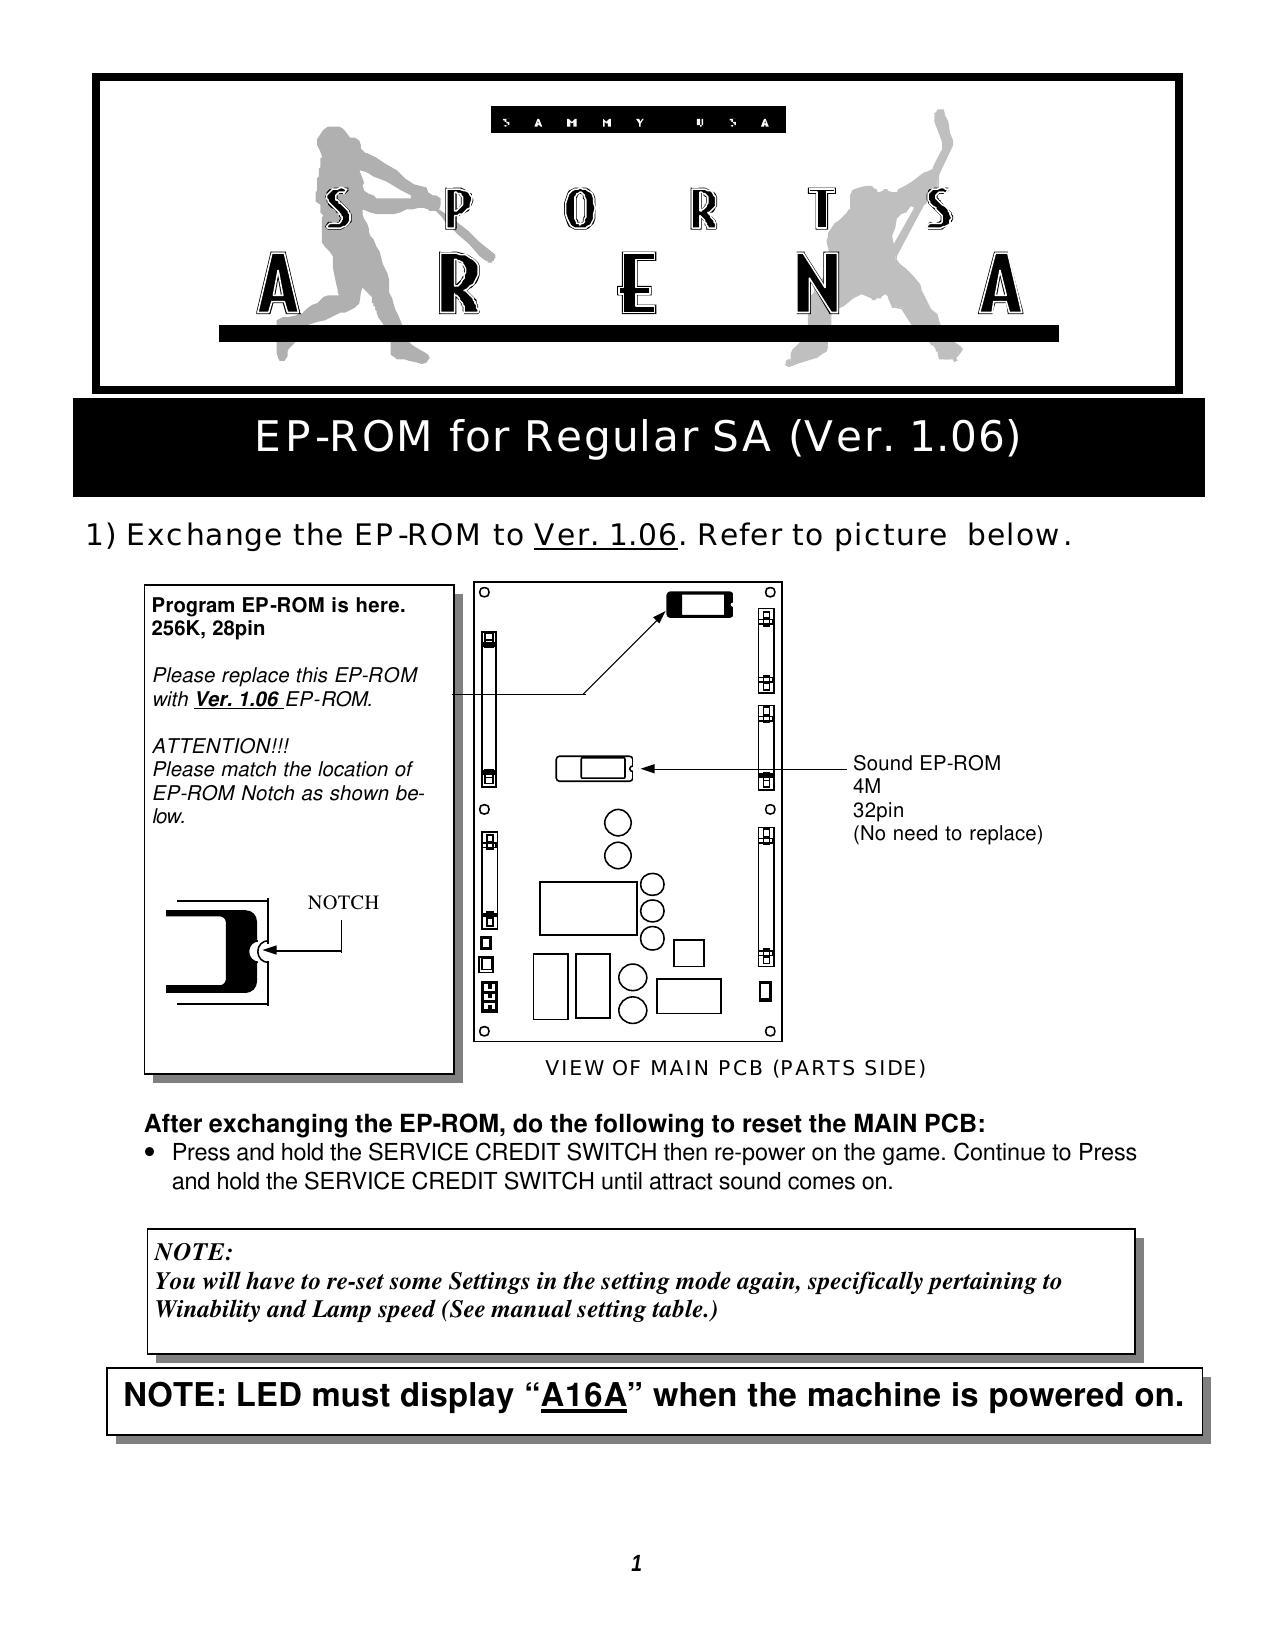 071601 S Arena Operating Manual (Only setting) A16A.pub